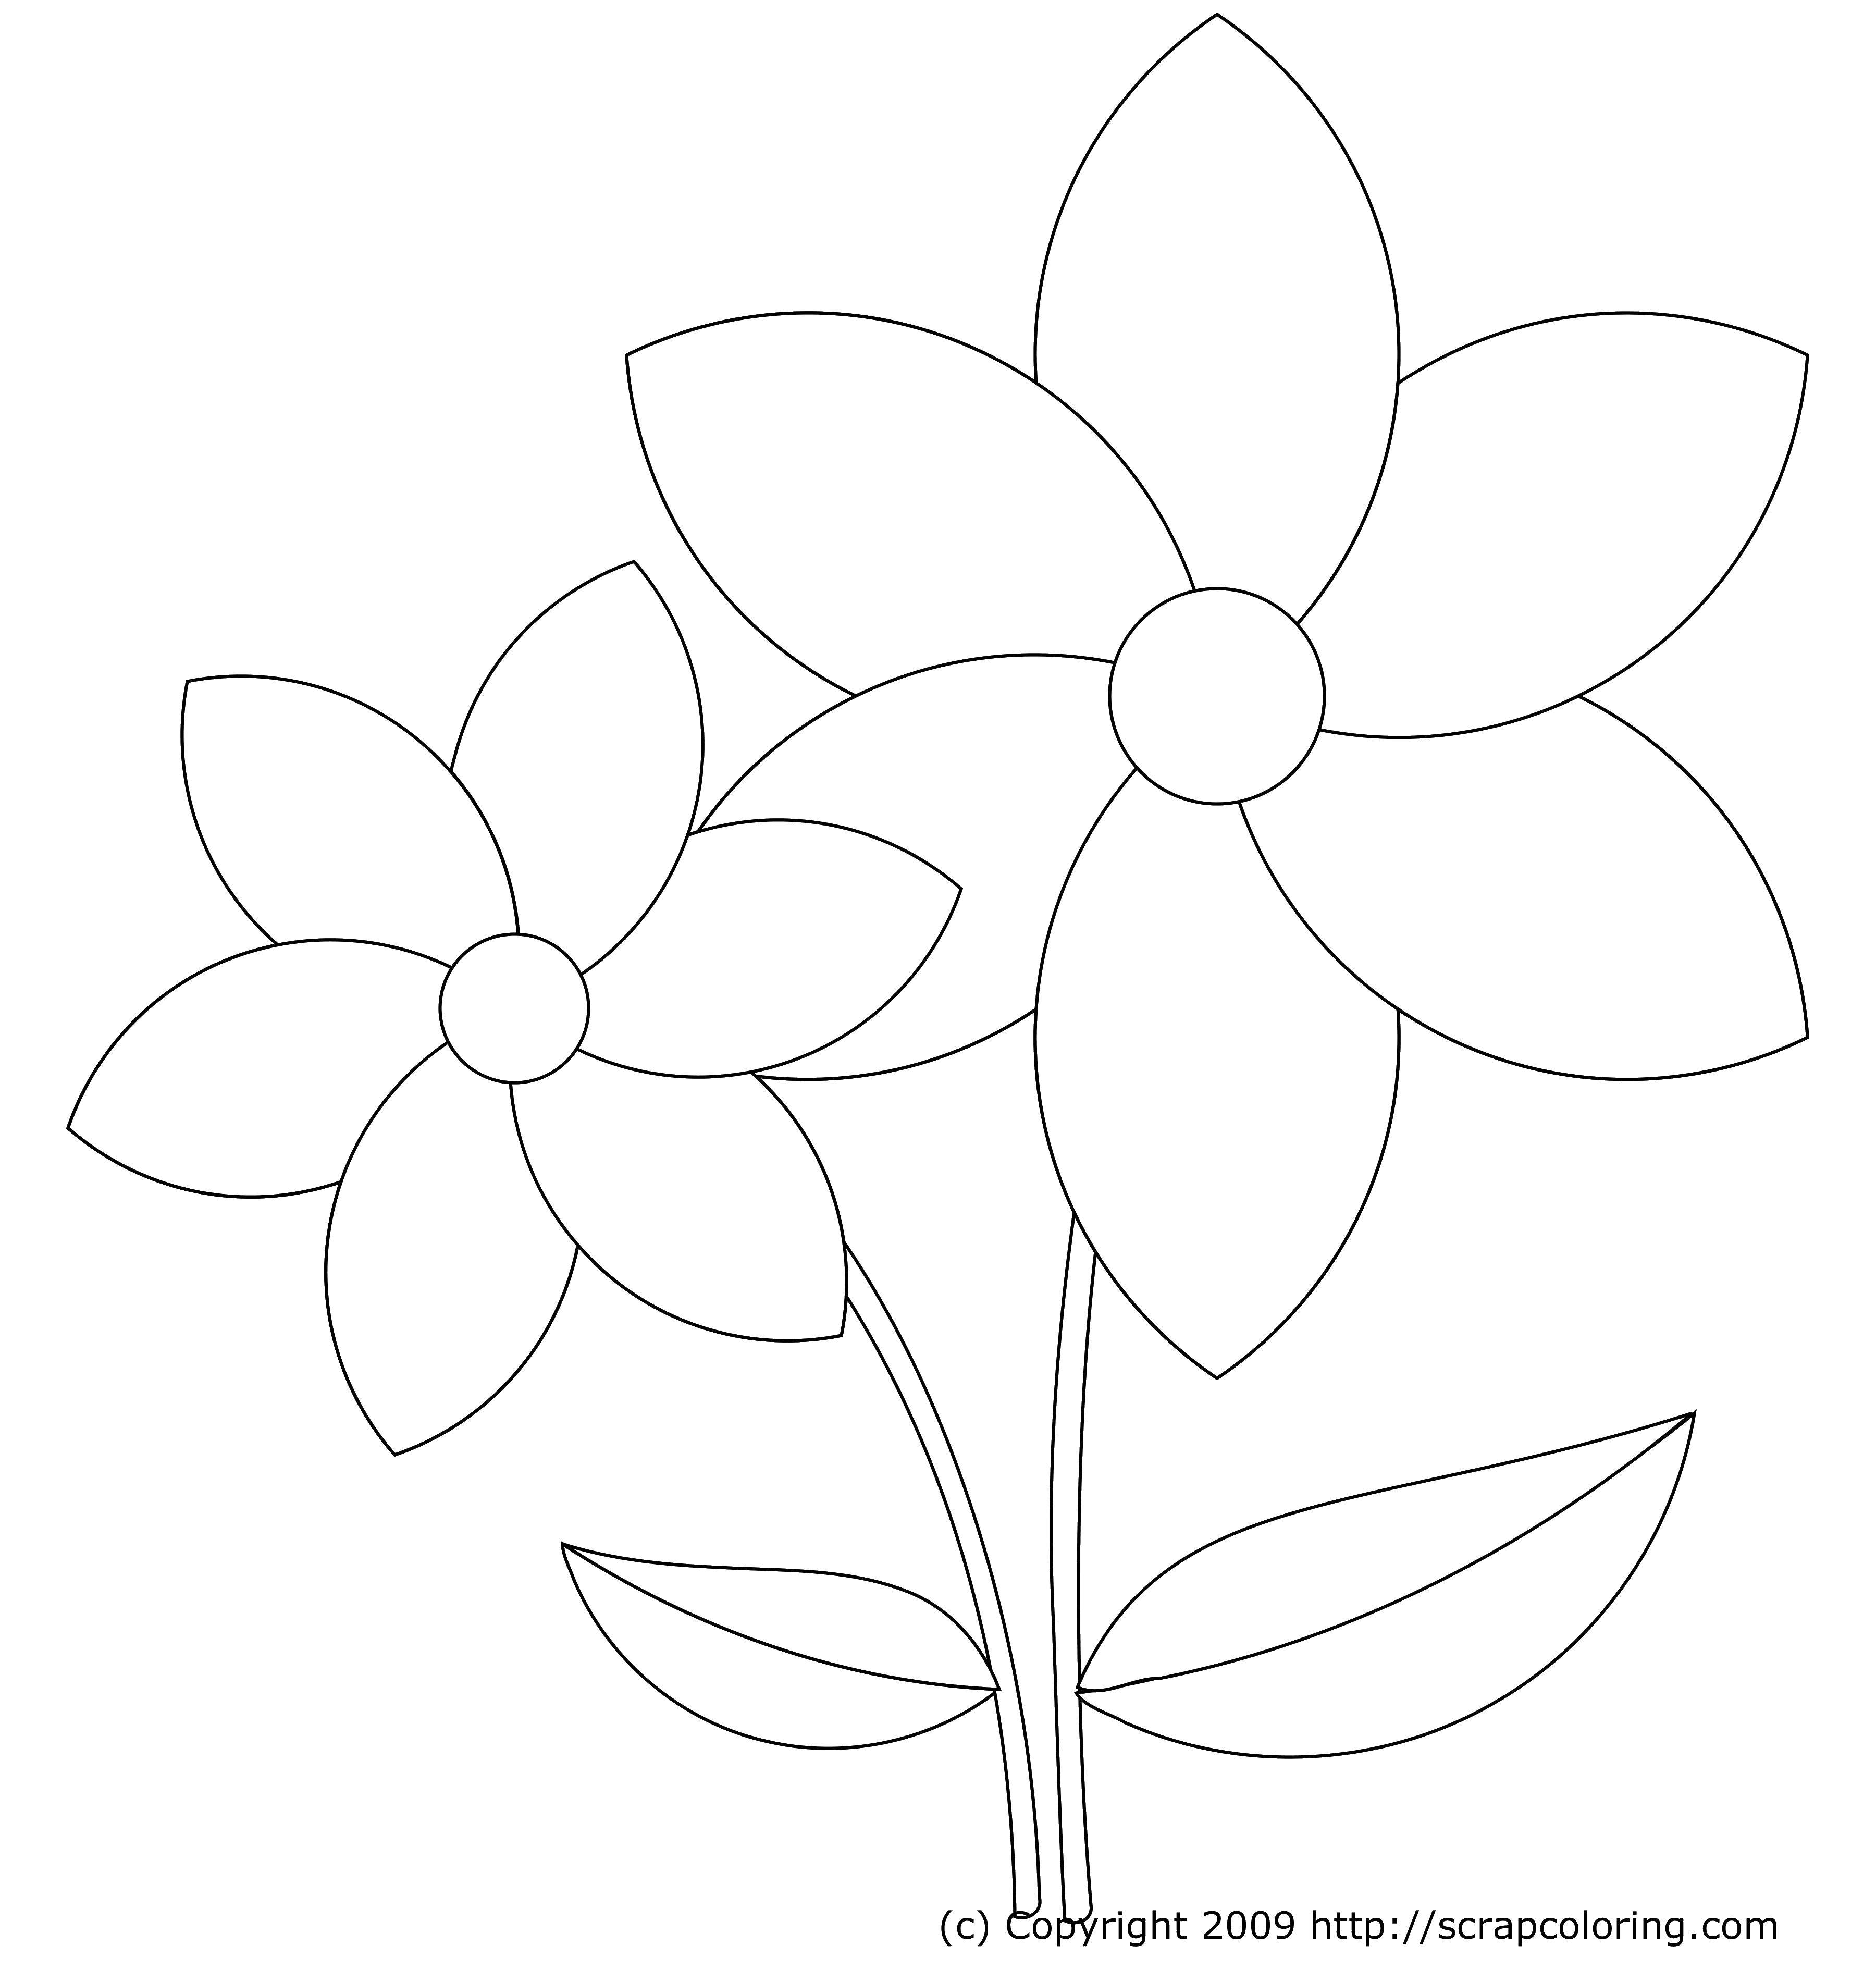 Coloring Two flowers. Category flowers. Tags:  the flowers , leaves, .